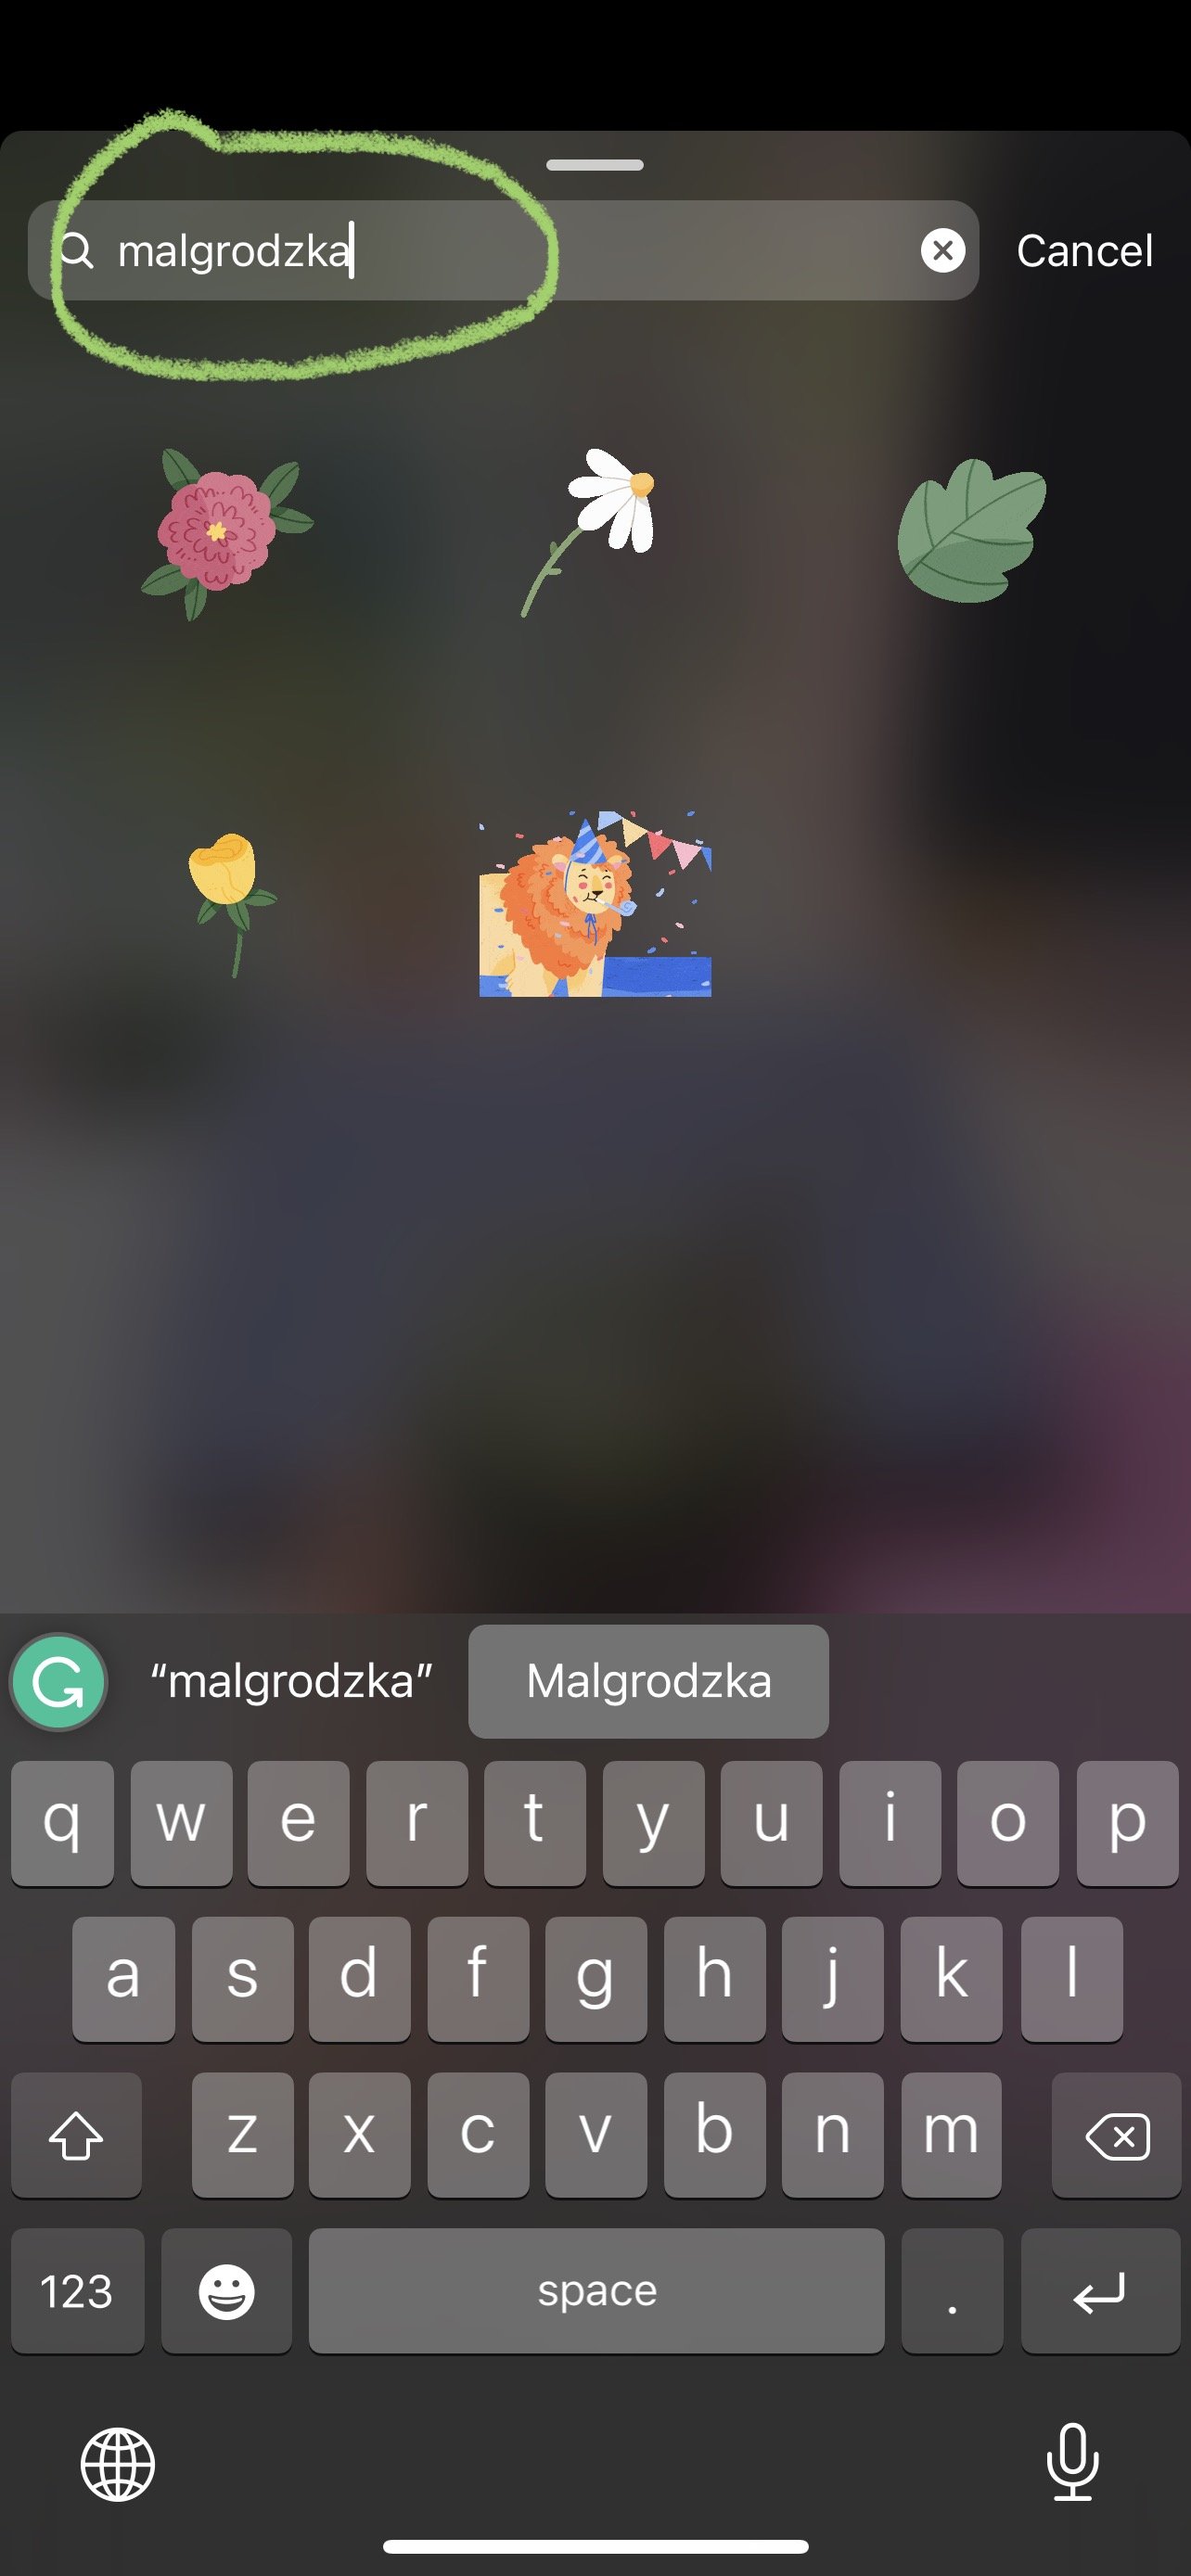 Type "malgrodzka" in the search bar